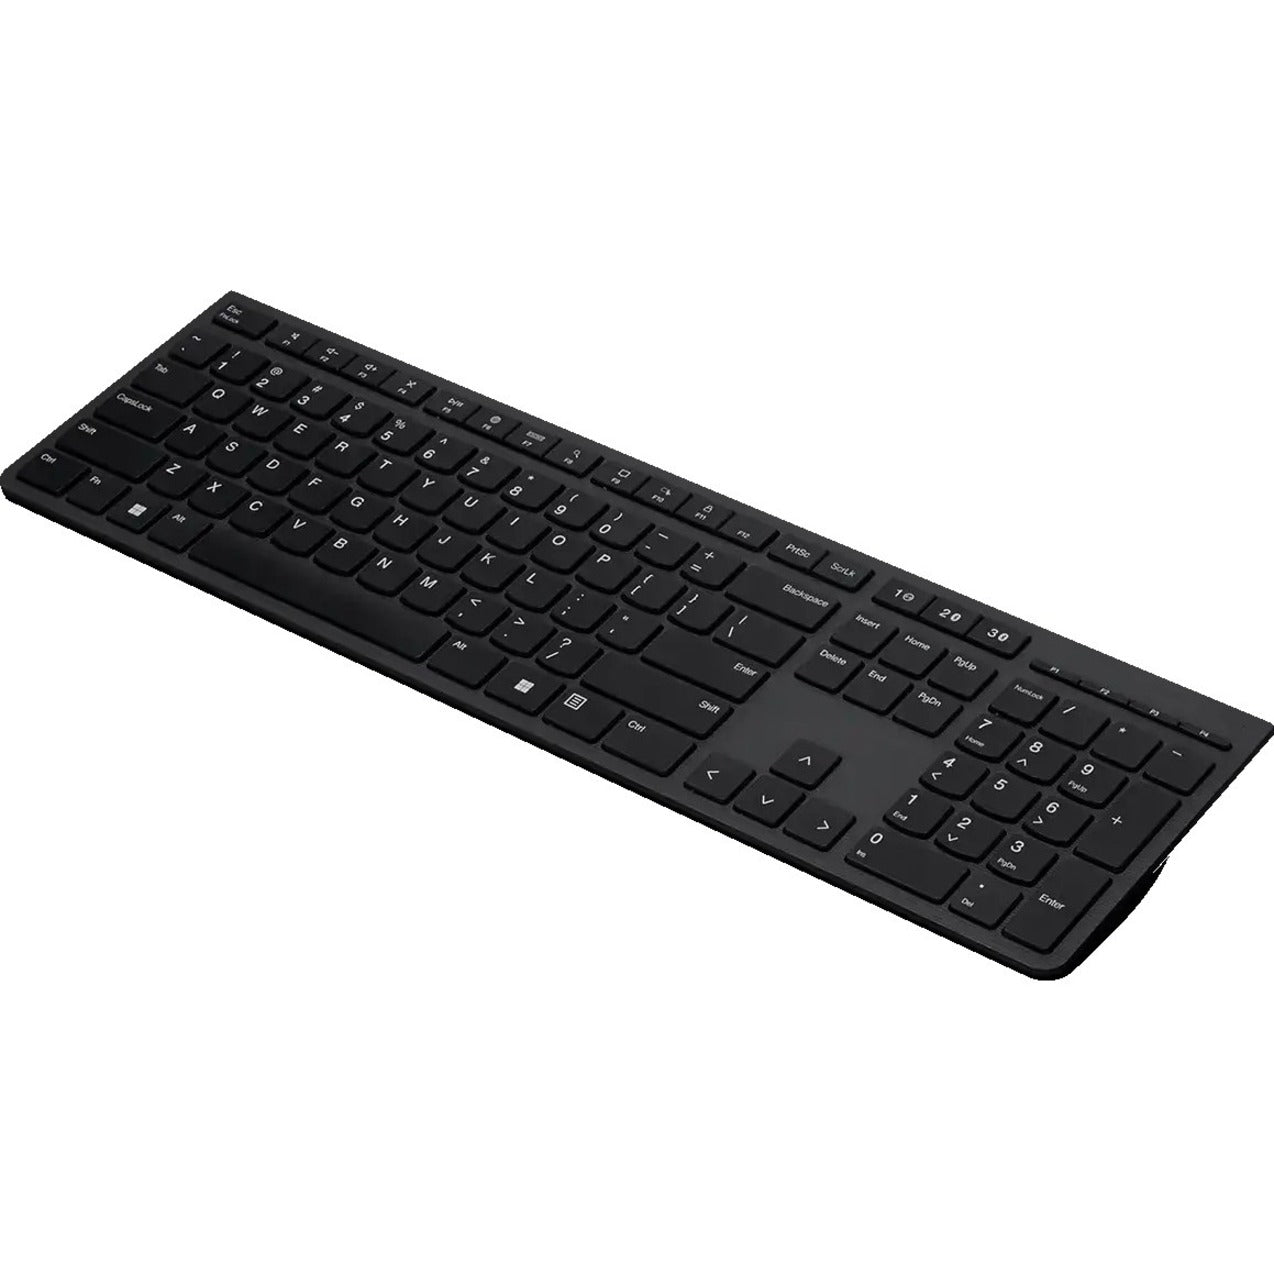 Lenovo 4Y41K04031 Professional Wireless Rechargeable Keyboard -US English, Full-size, Quiet Keys, Multi-host Support